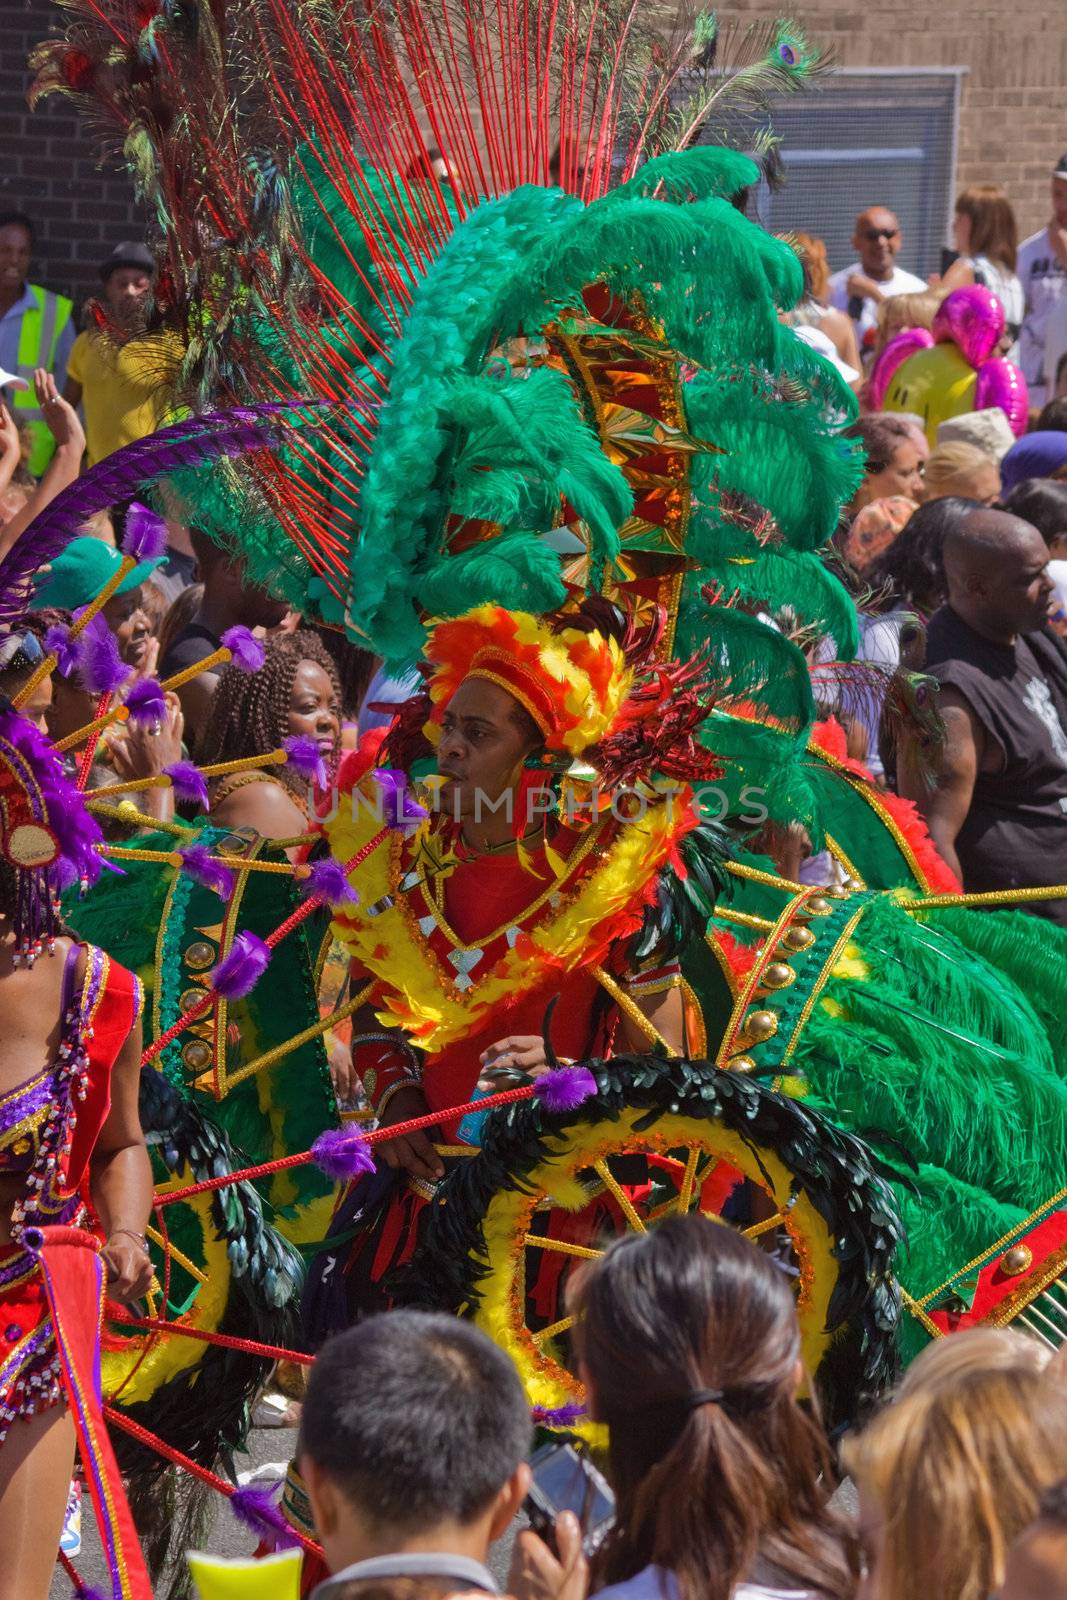 BRISTOL, ENGLAND - JULY 3: Participant and spectators at the St Pauls "Afrikan-Caribbean" carnival in Bristol, England on July 3, 2010. A record 70,000 people attended the 42nd running of the annual event